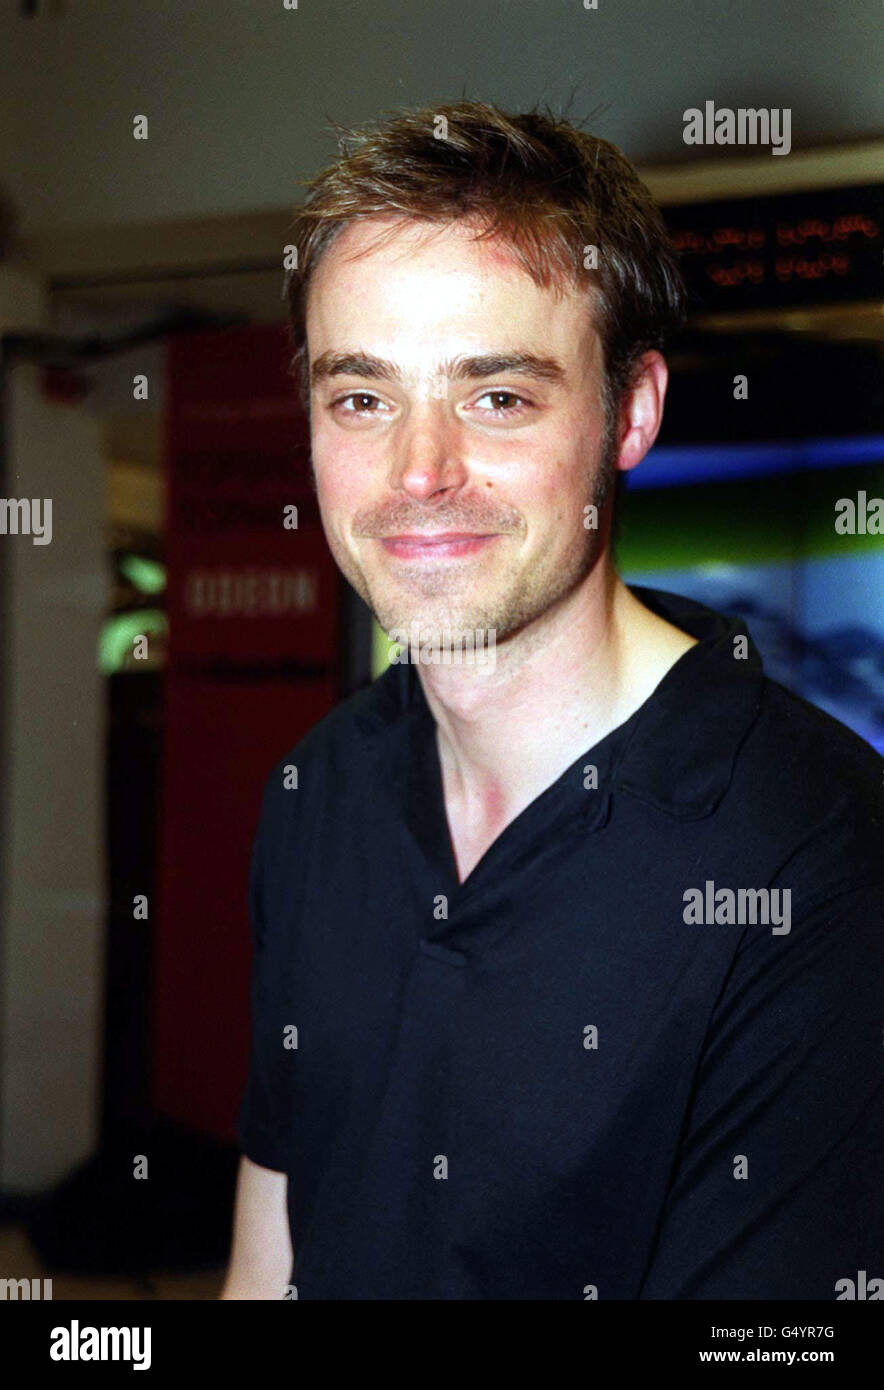 Radio One DJ Jamie Theakston at Topshop and Topman on Oxford Street, London. The Radio one DJ broadcast live from the clothing store, for a unique three way satellite link-up as part of the BBC Talent initiative. Stock Photo